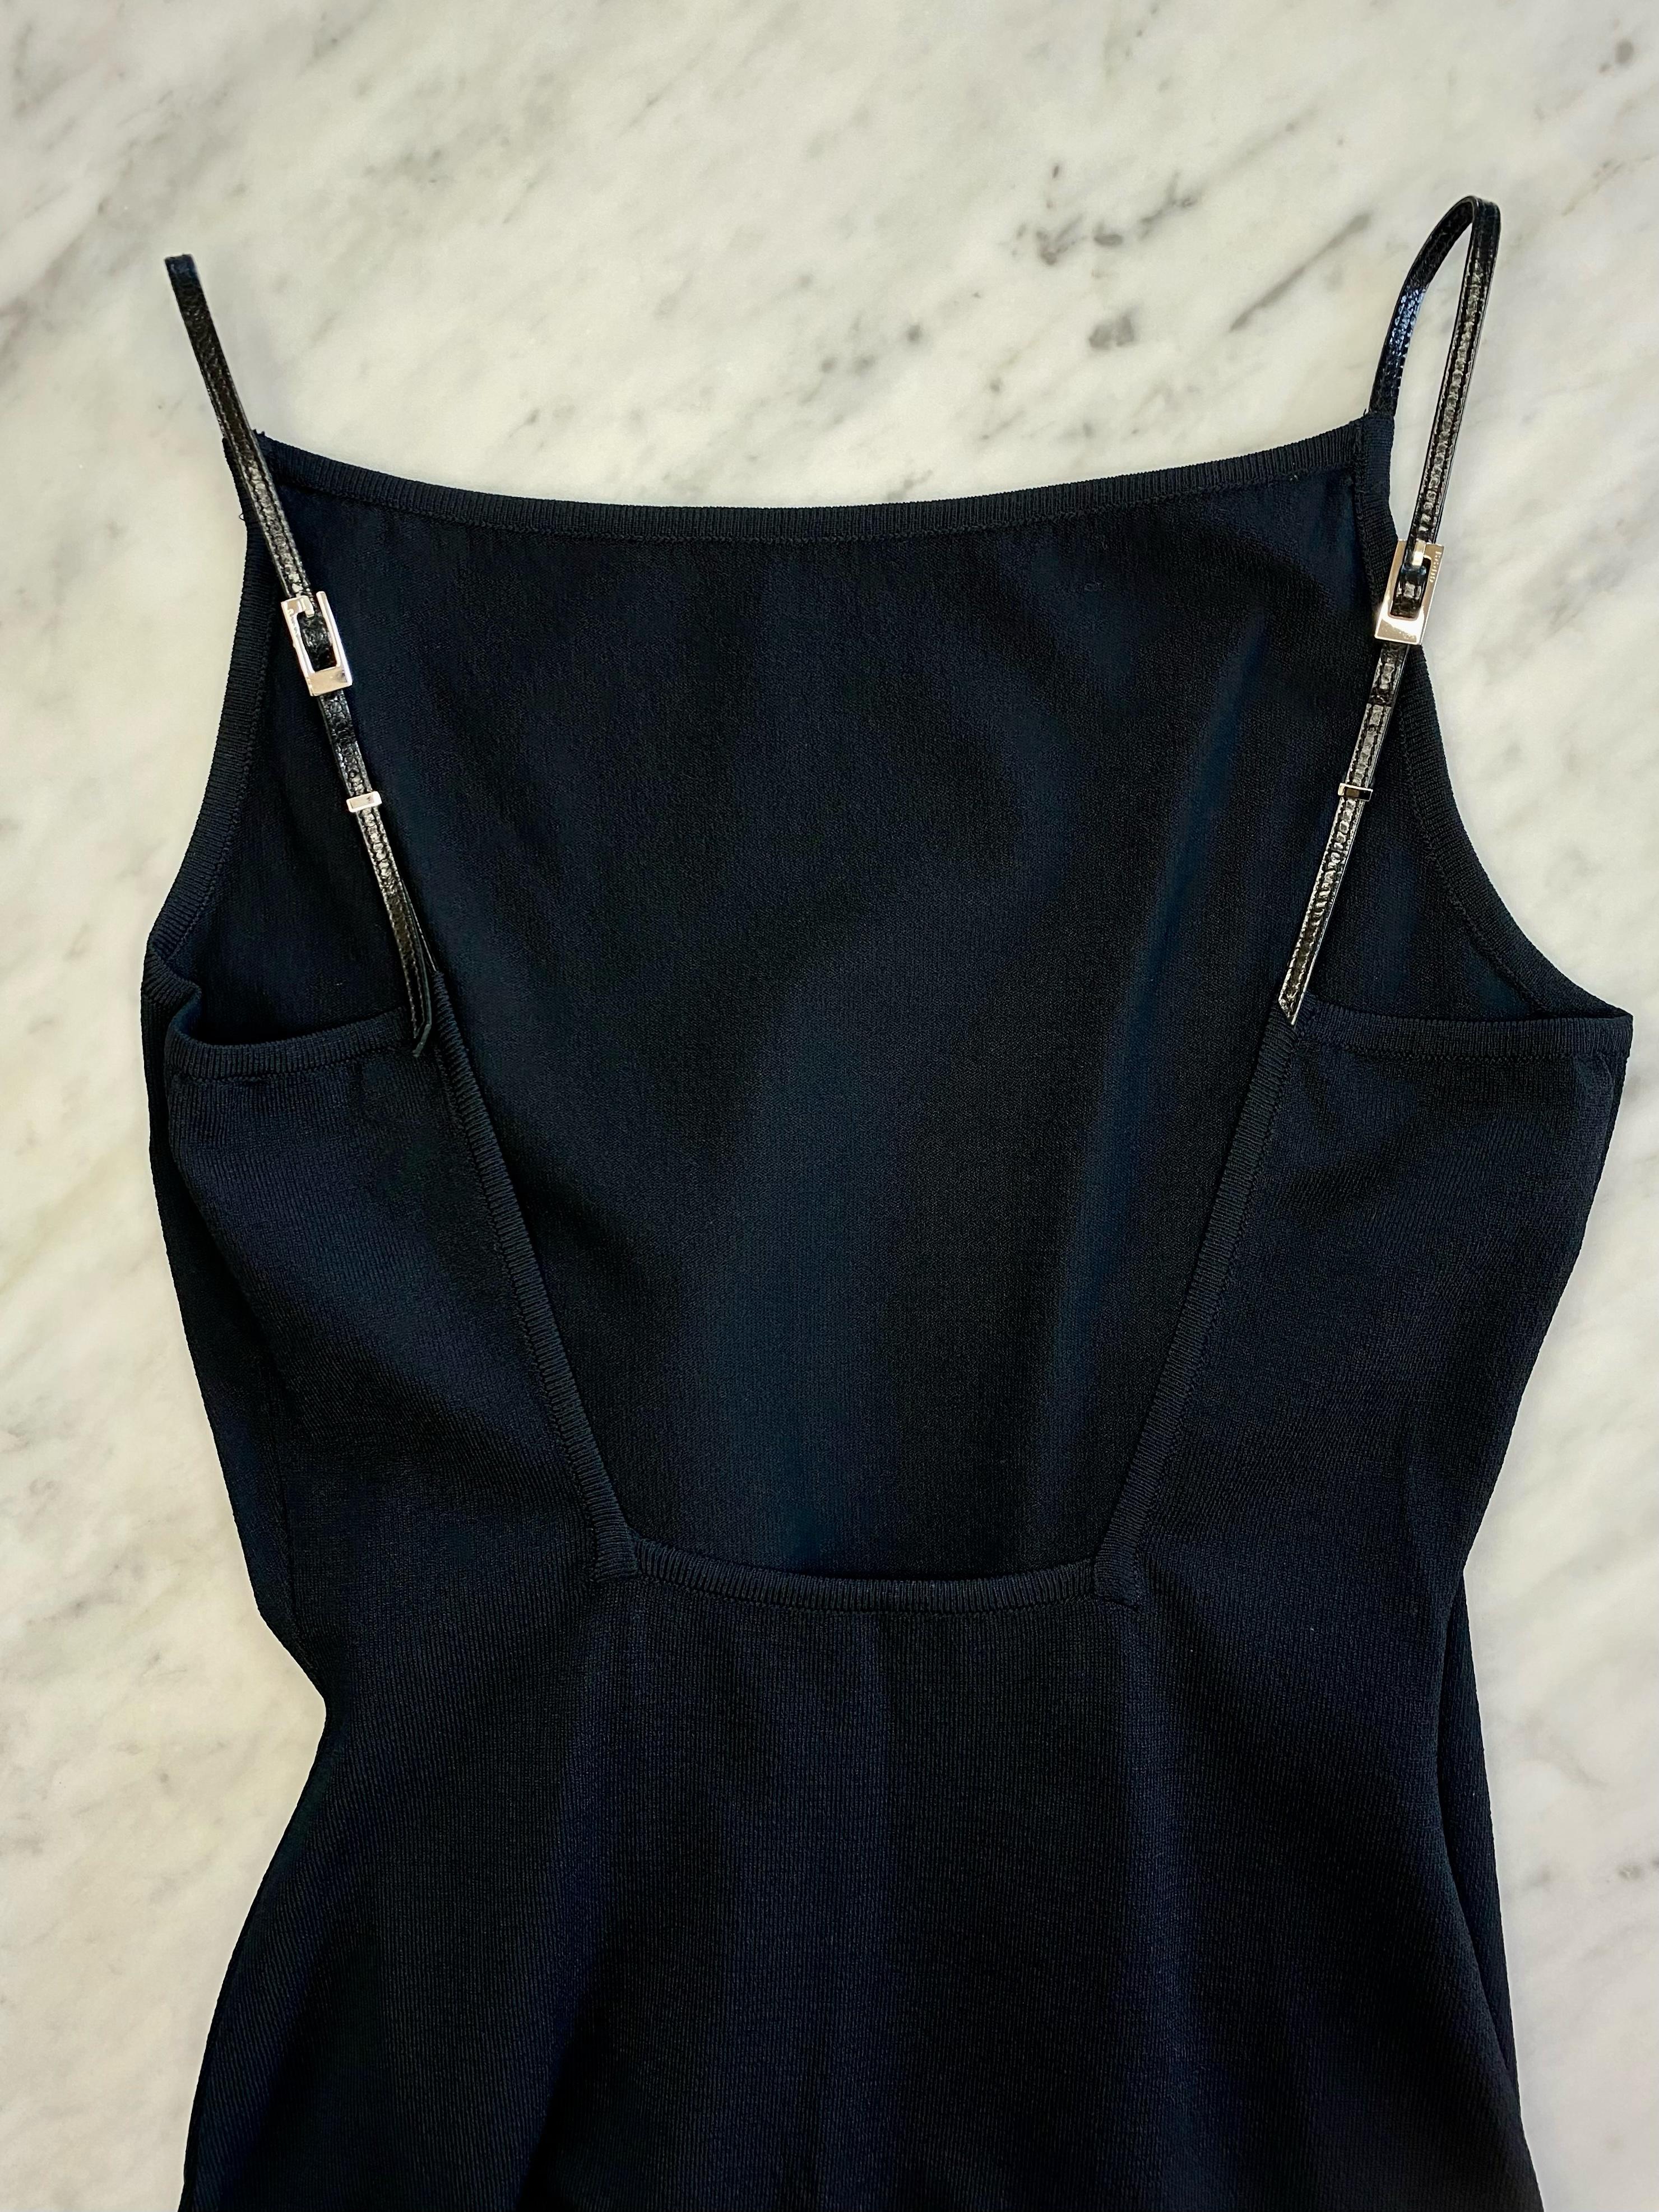 S/S 1998 Gucci by Tom Ford G Buckle Strap Knit Sleeveless Dress In Excellent Condition For Sale In West Hollywood, CA